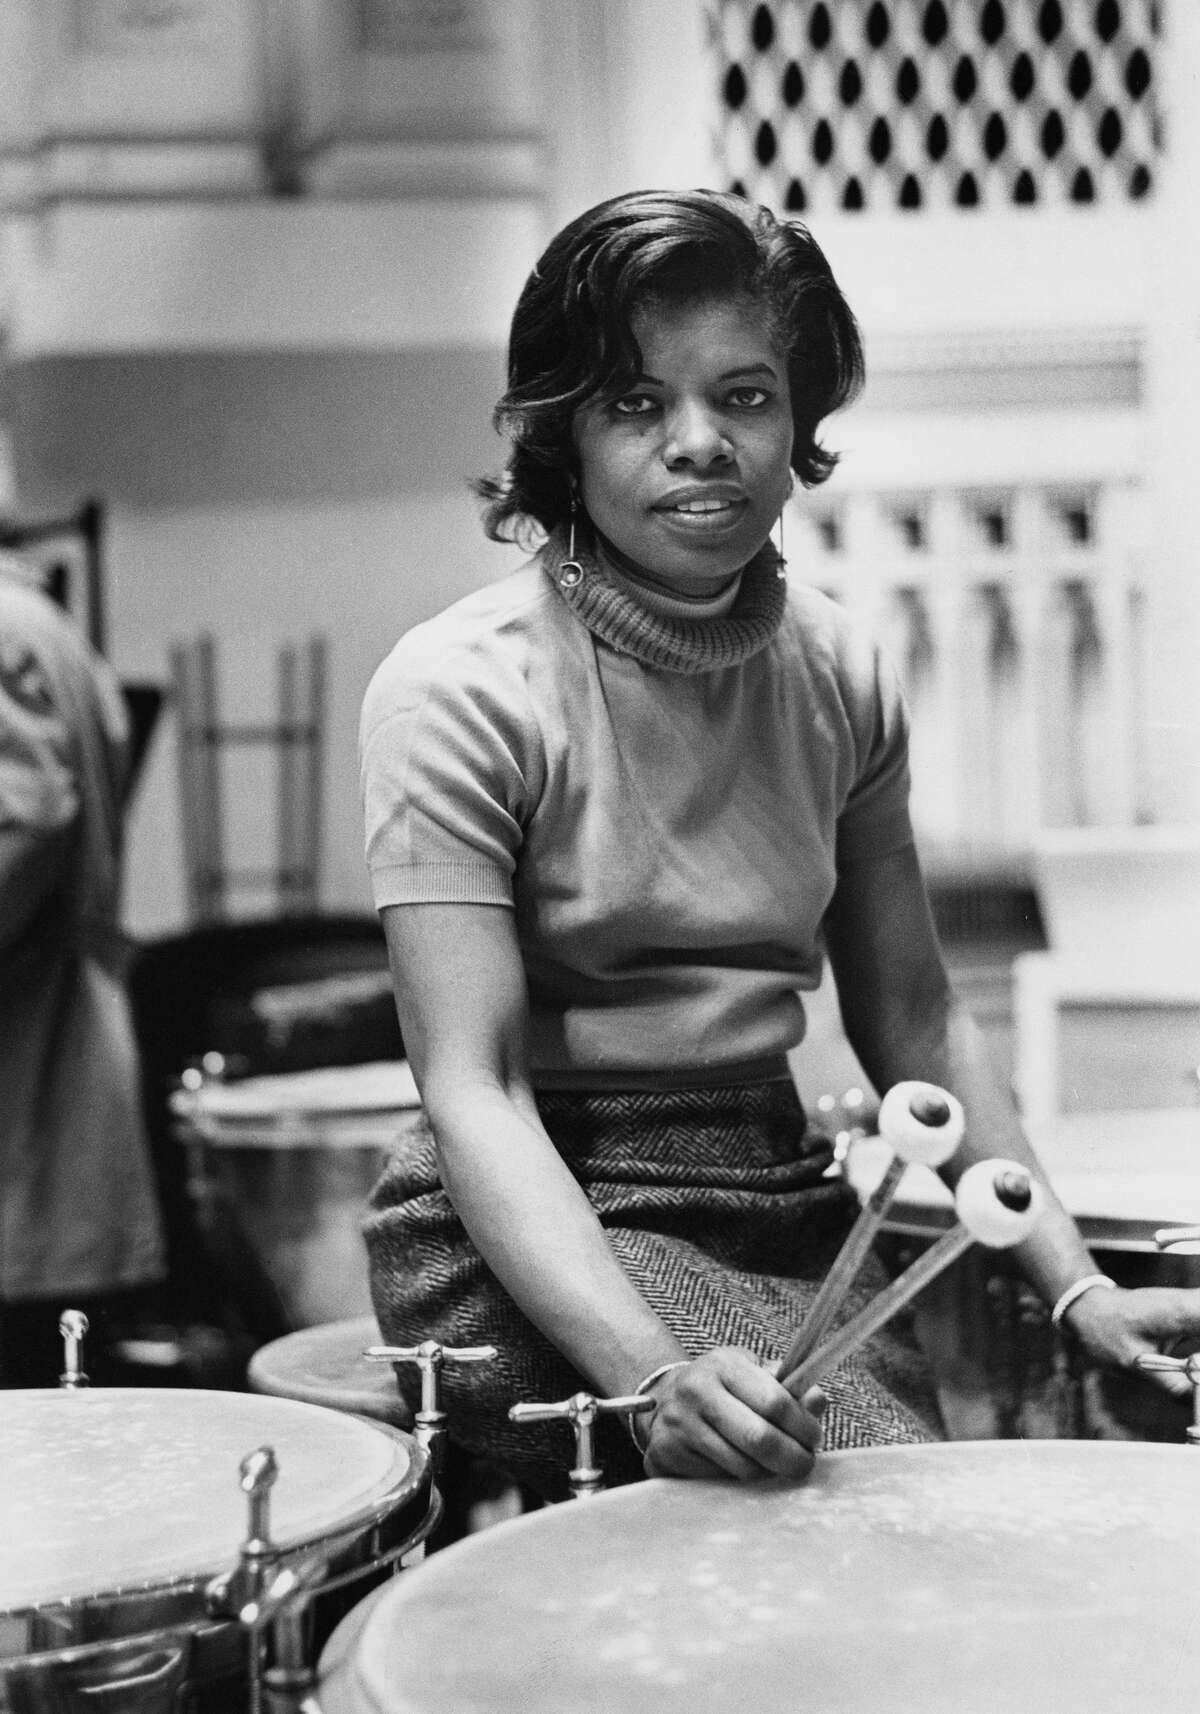 FILE: The timpanist Elayne Jones in 1965. Jones, a timpanist who was said to be the first Black principal player in a major American orchestra when she joined the San Francisco Symphony in 1972, and who mounted a legal battle over racial and sexual discrimination when she was denied tenure two years later, died on Saturday, Dec. 17, 2022, at her home in Walnut Creek, Calif. She was 94. (Sam Falk/The New York Times)